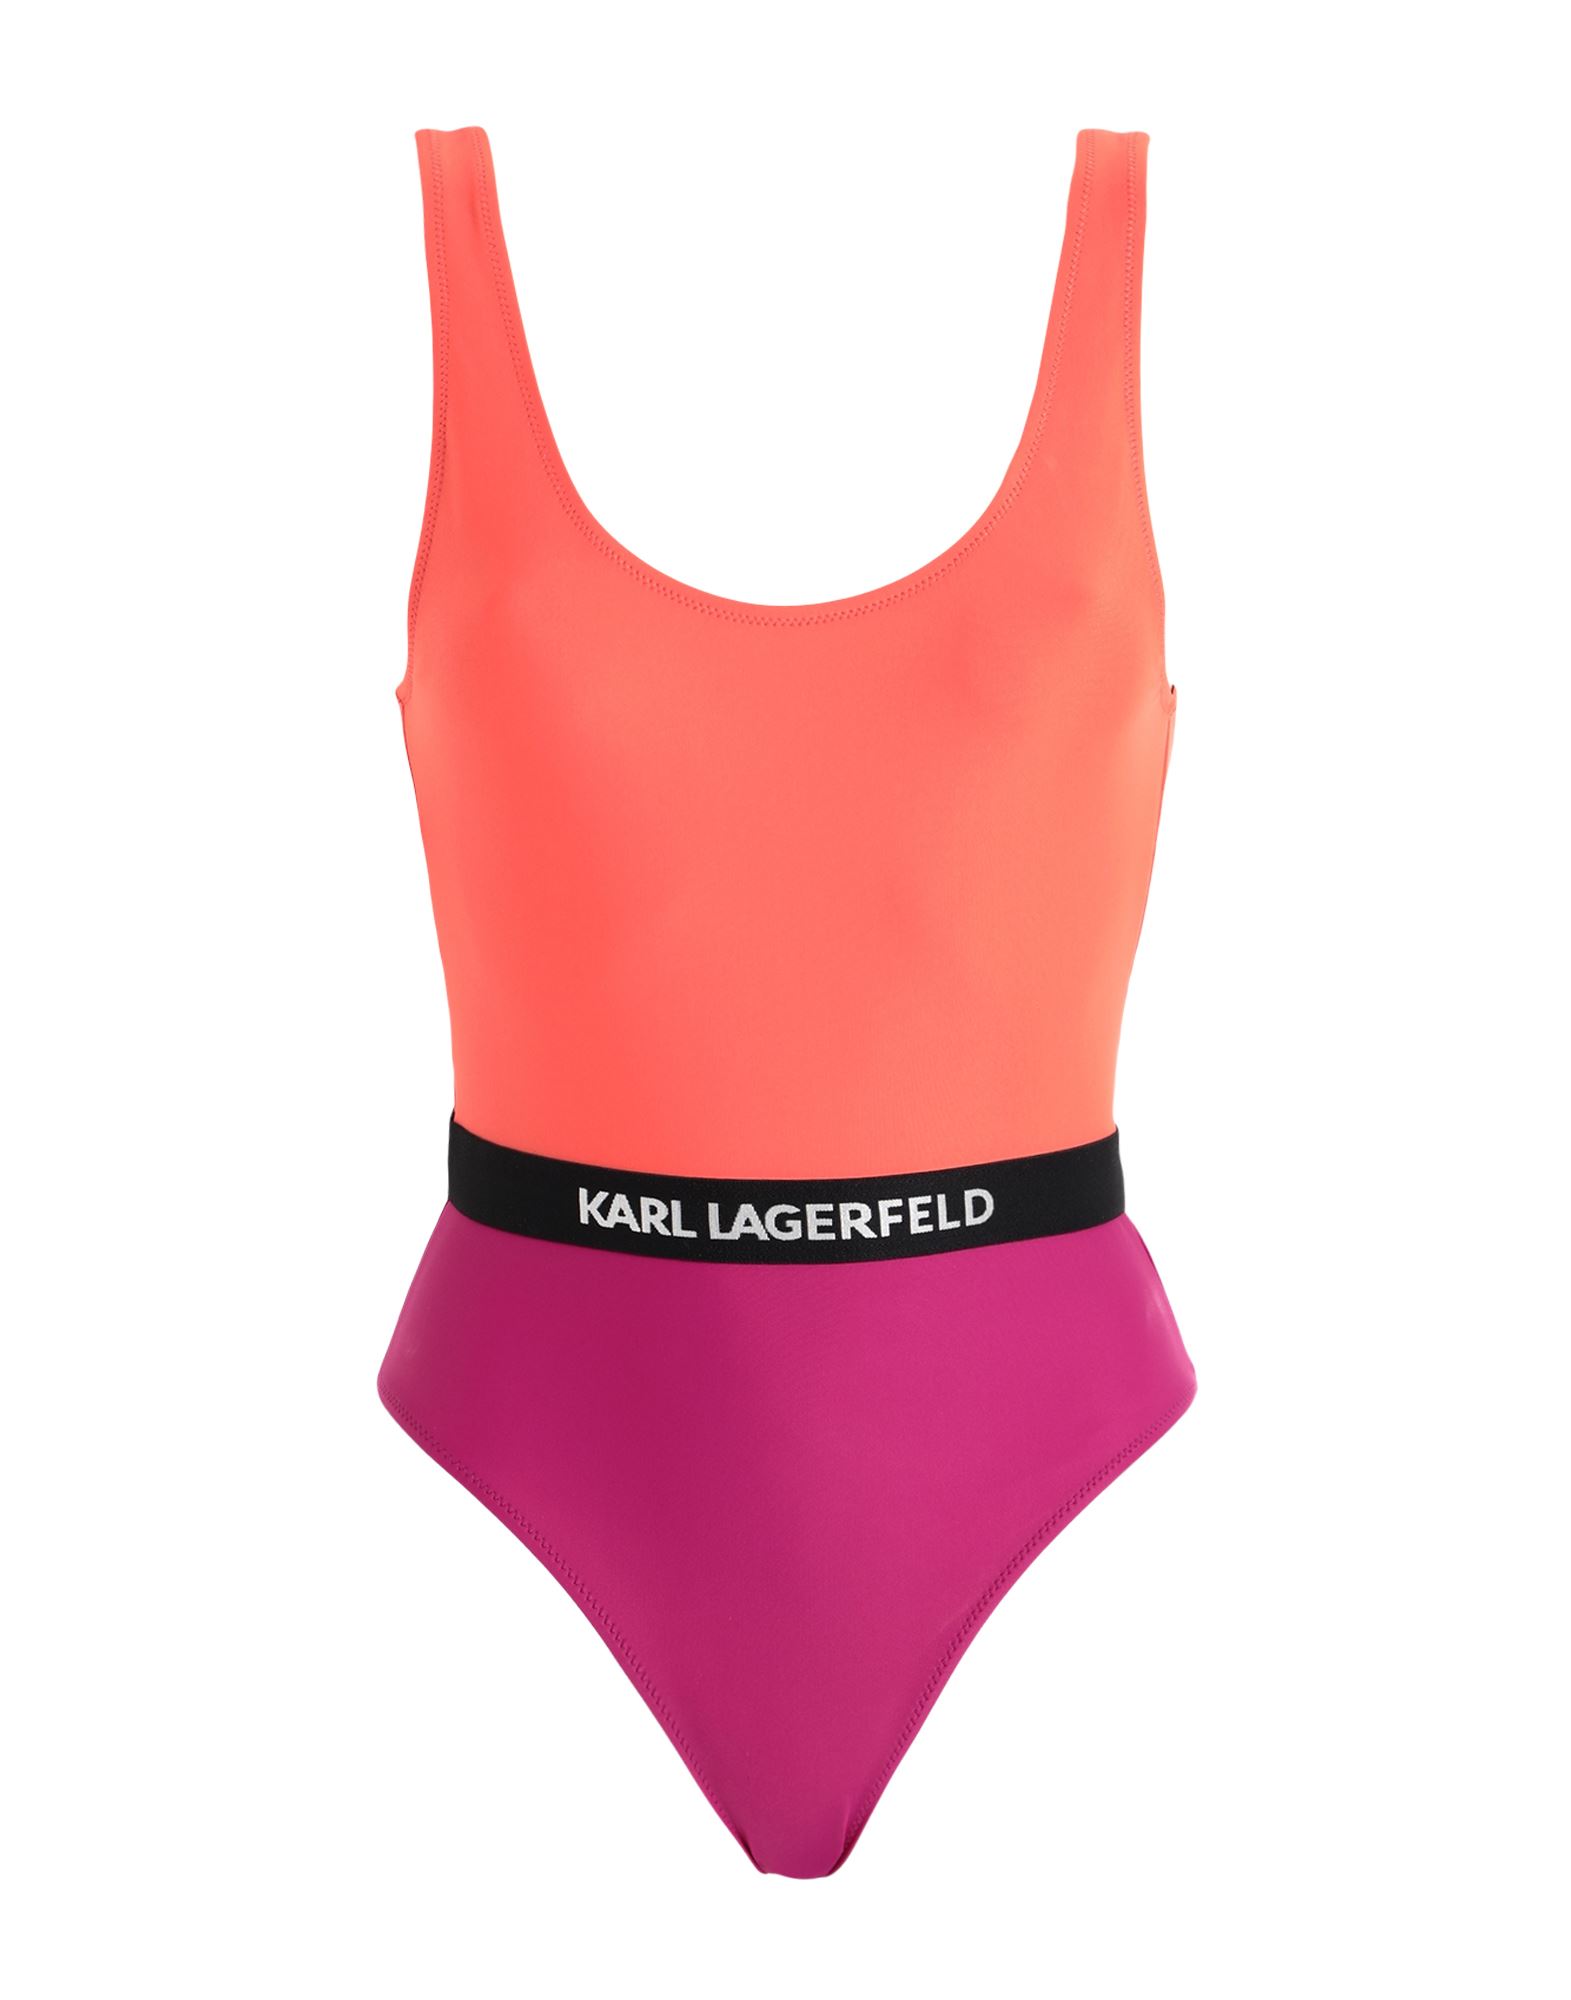 Karl Lagerfeld Colour Block Swimsuit Woman One-piece Swimsuit Orange Size S Recycled Polyamide, Elas